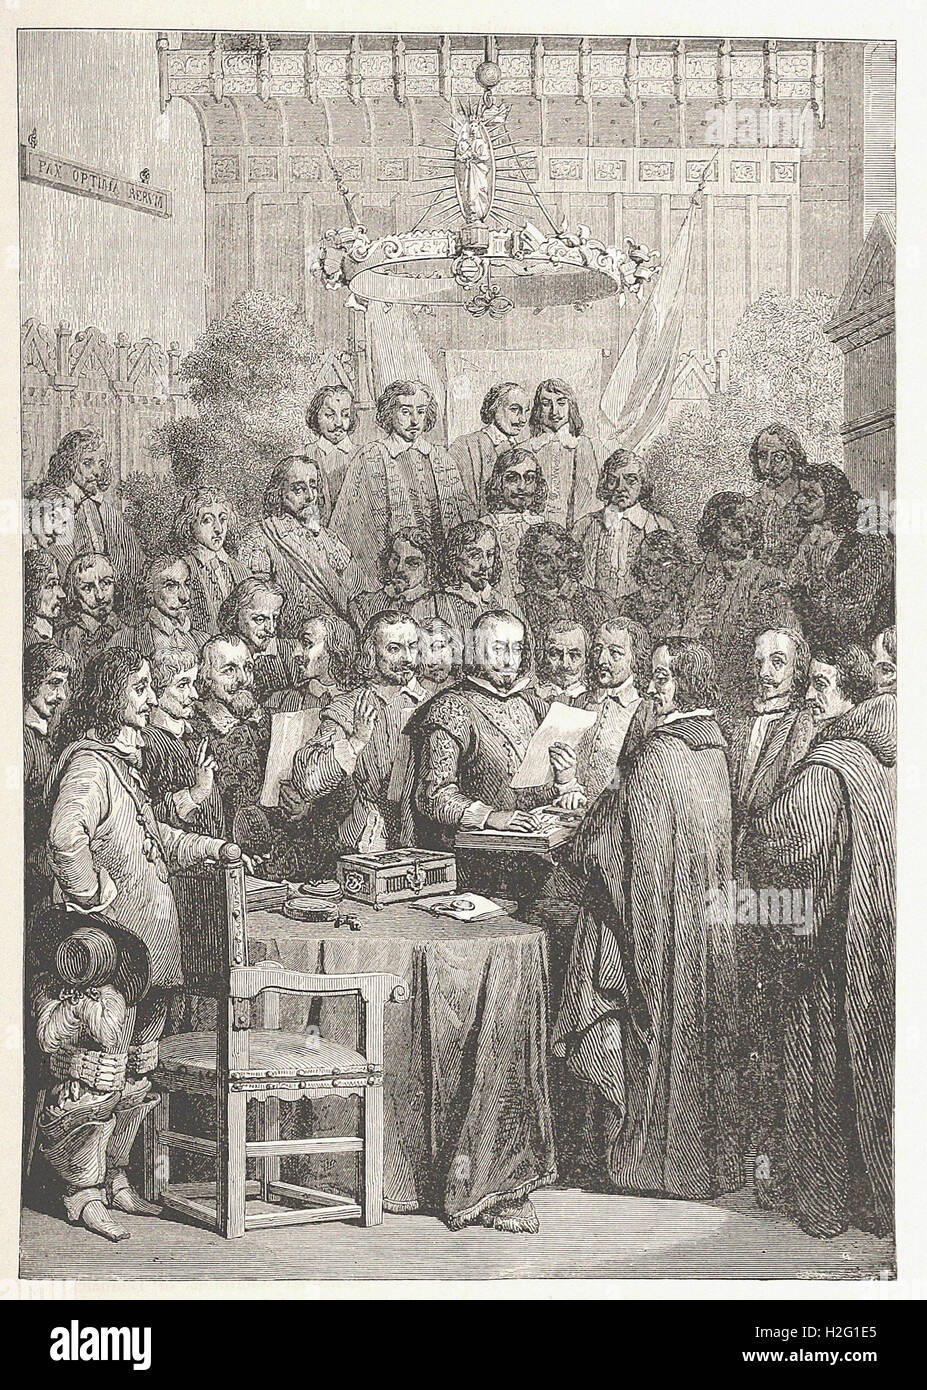 SIGNING OF THE TREATY OK WESTPHALIA. - from 'Cassell's Illustrated Universal History' - 1882 Stock Photo